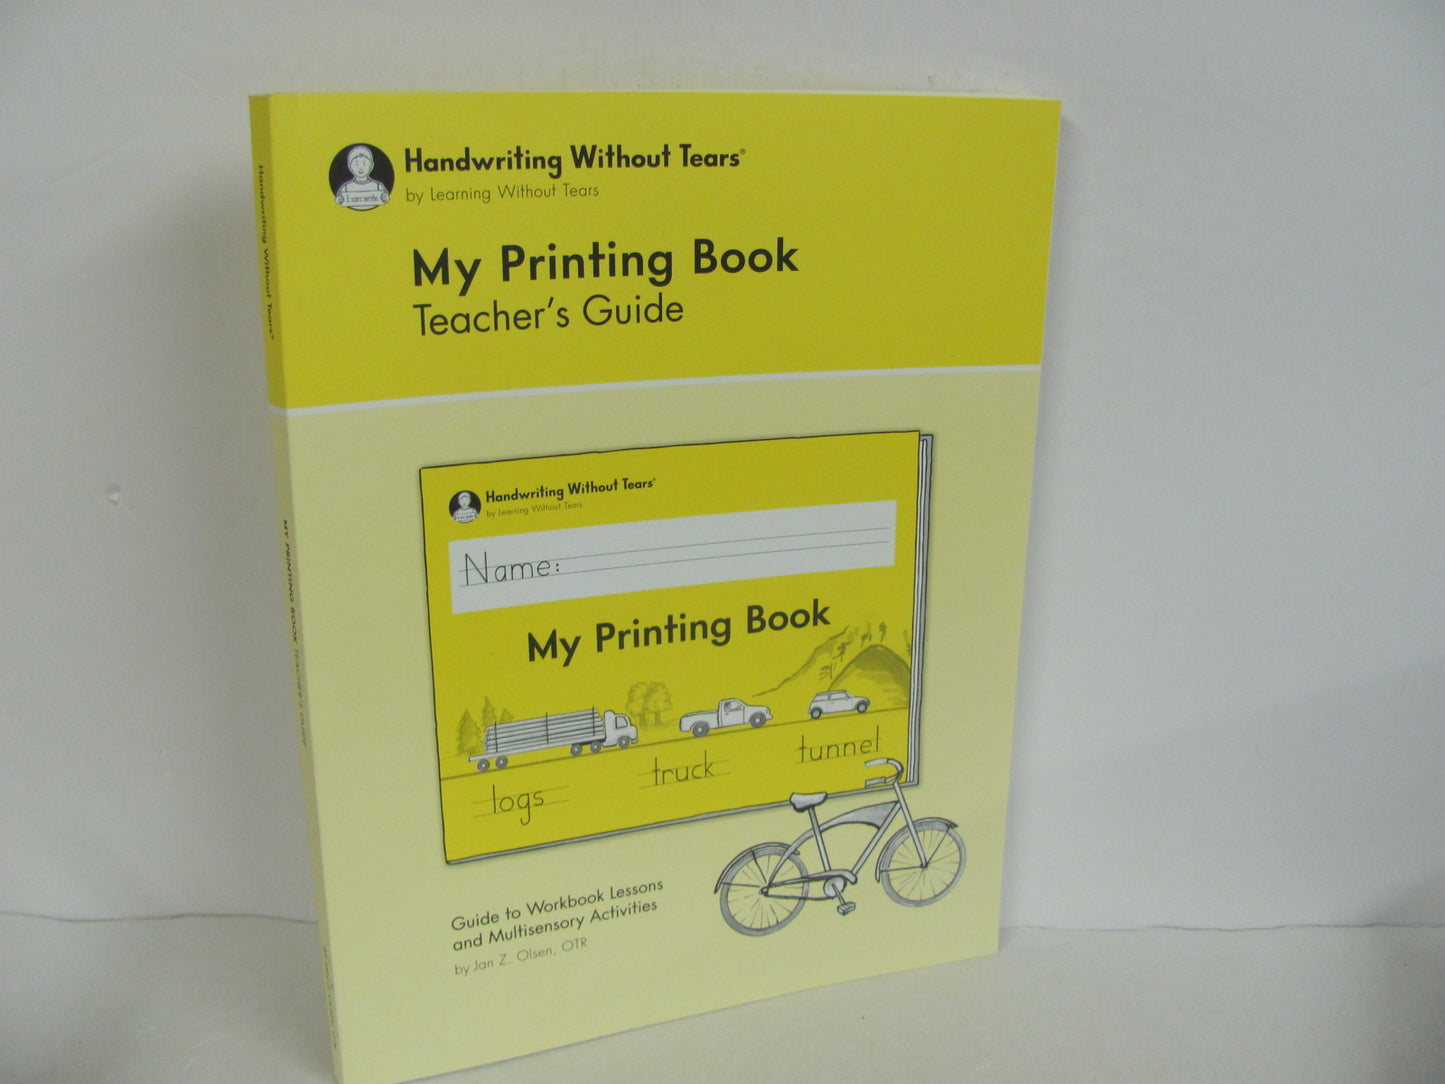 My Printing Book: Guide to Workbook Lessons and Multisensory Activities [Book]